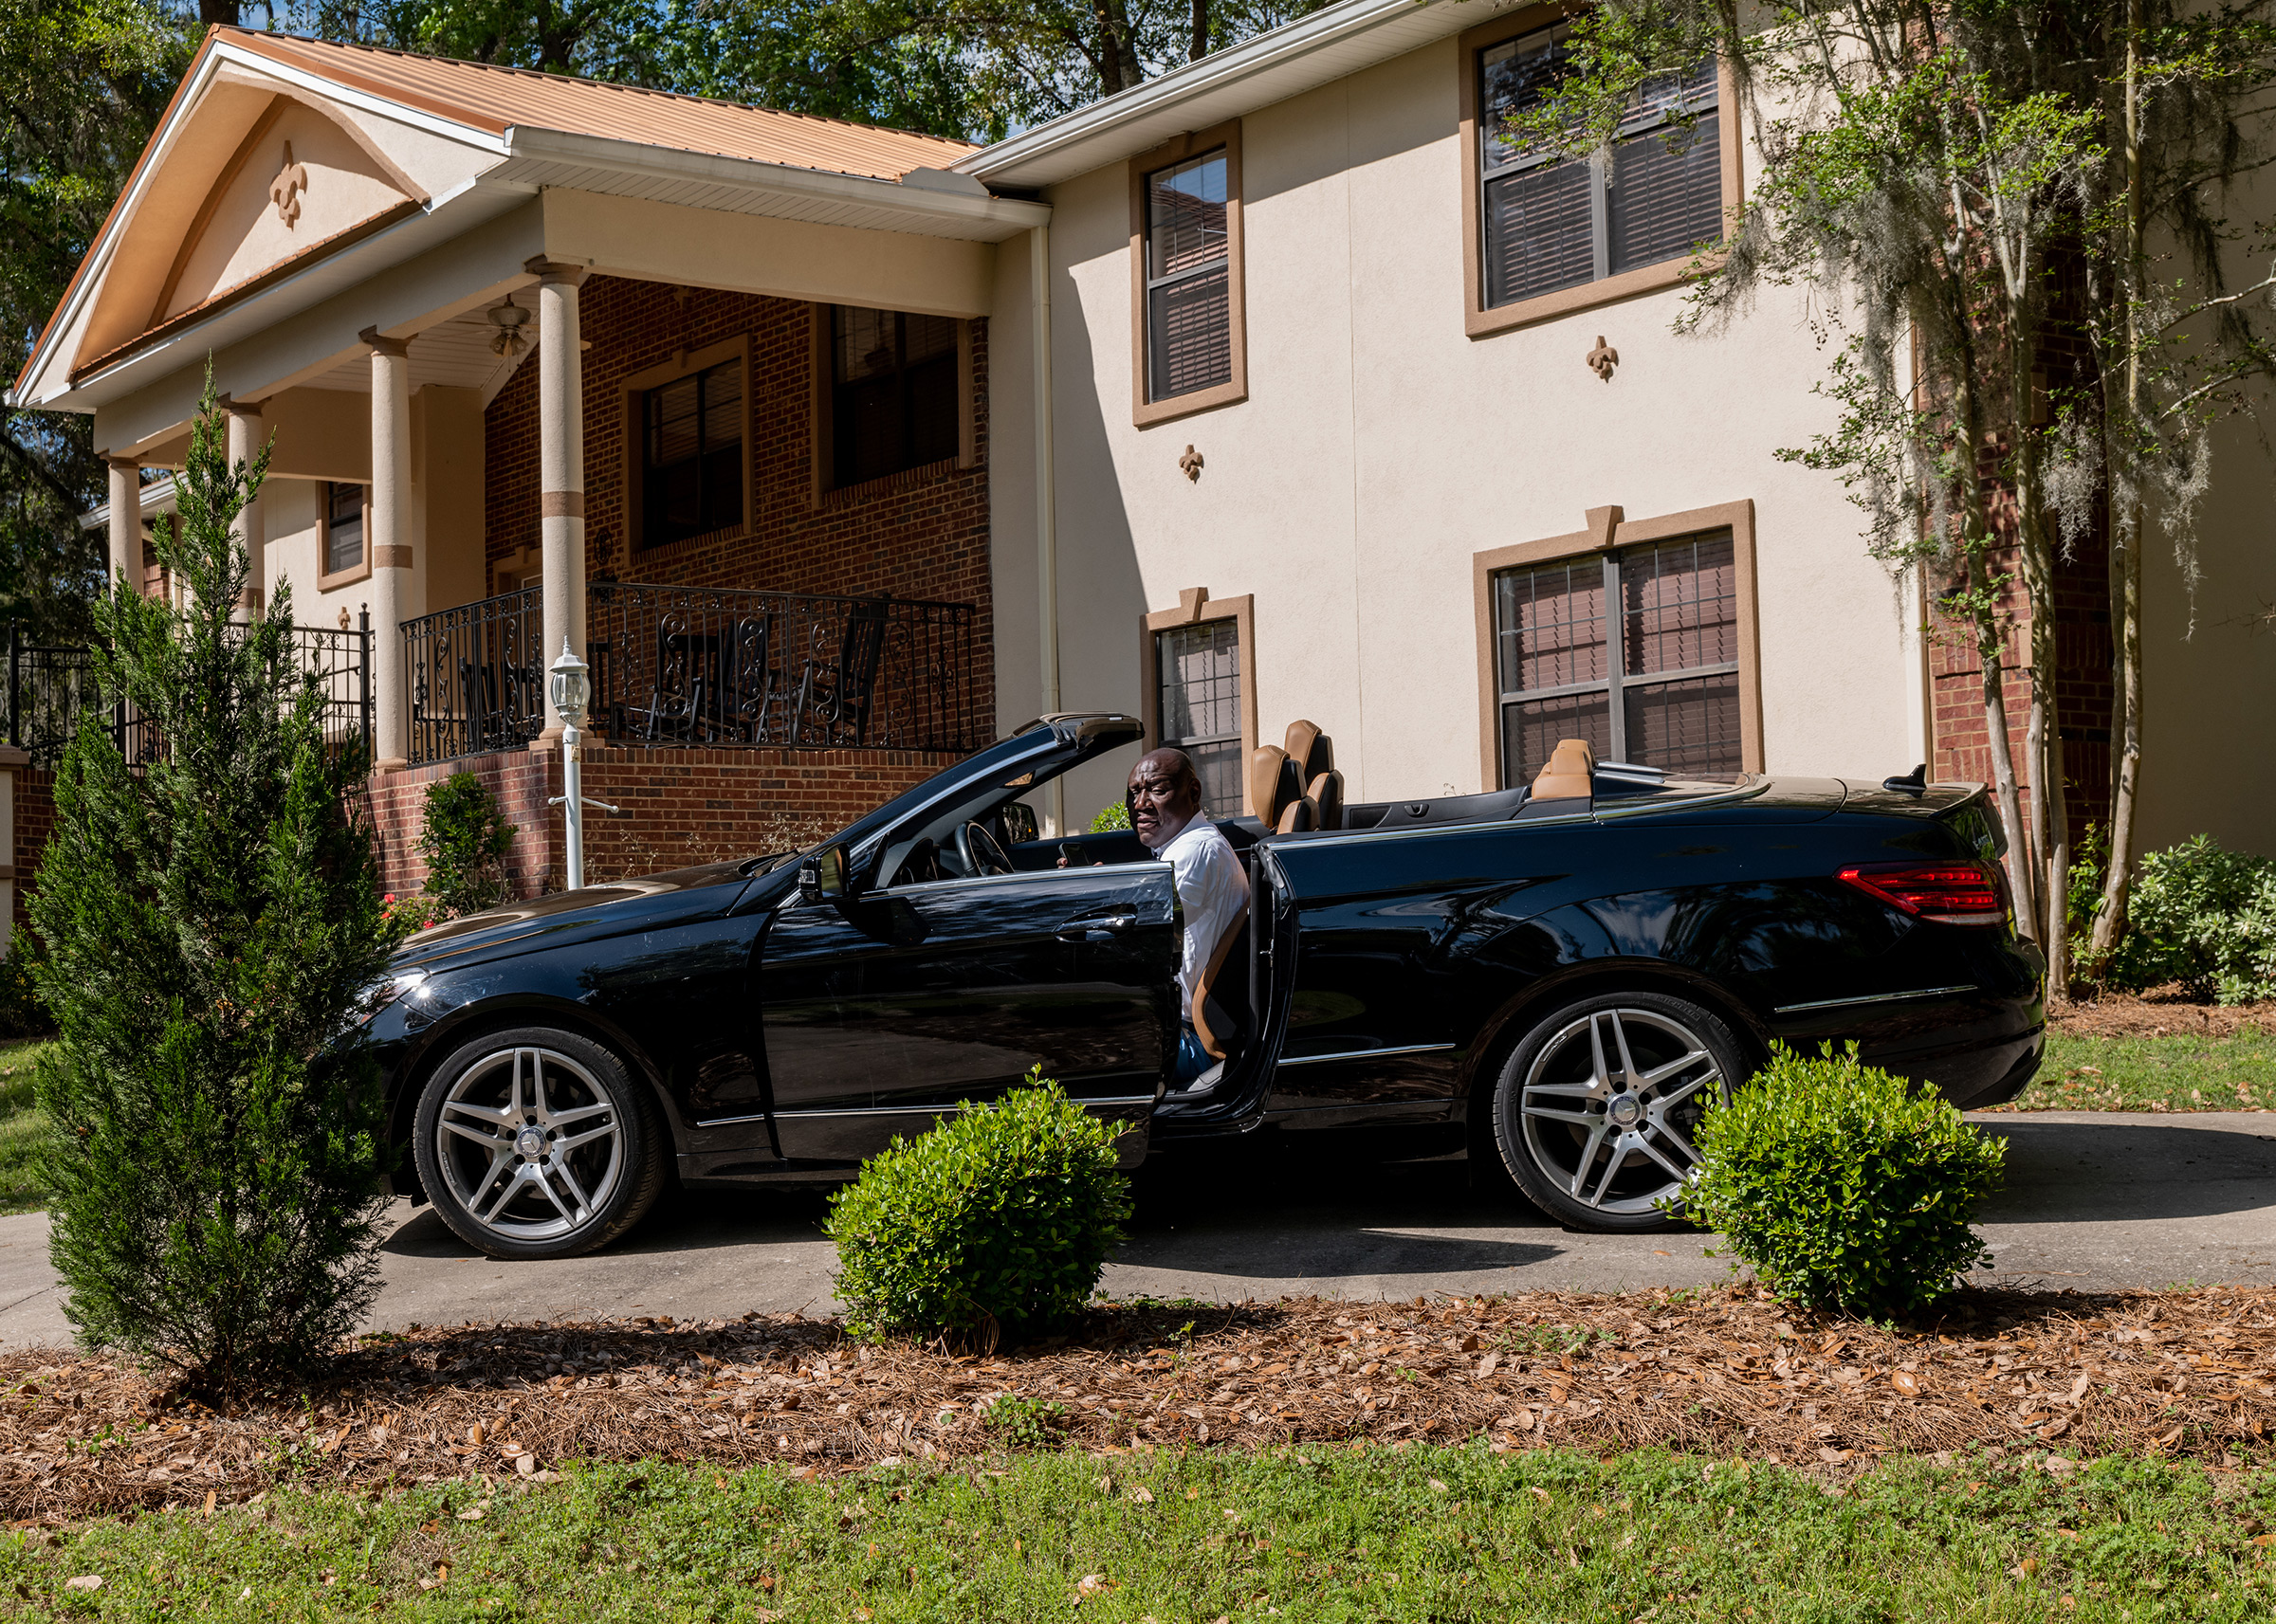 Crump in his driveway in Tallahassee, Fla., on April 4. (Ruddy Roye for TIME)